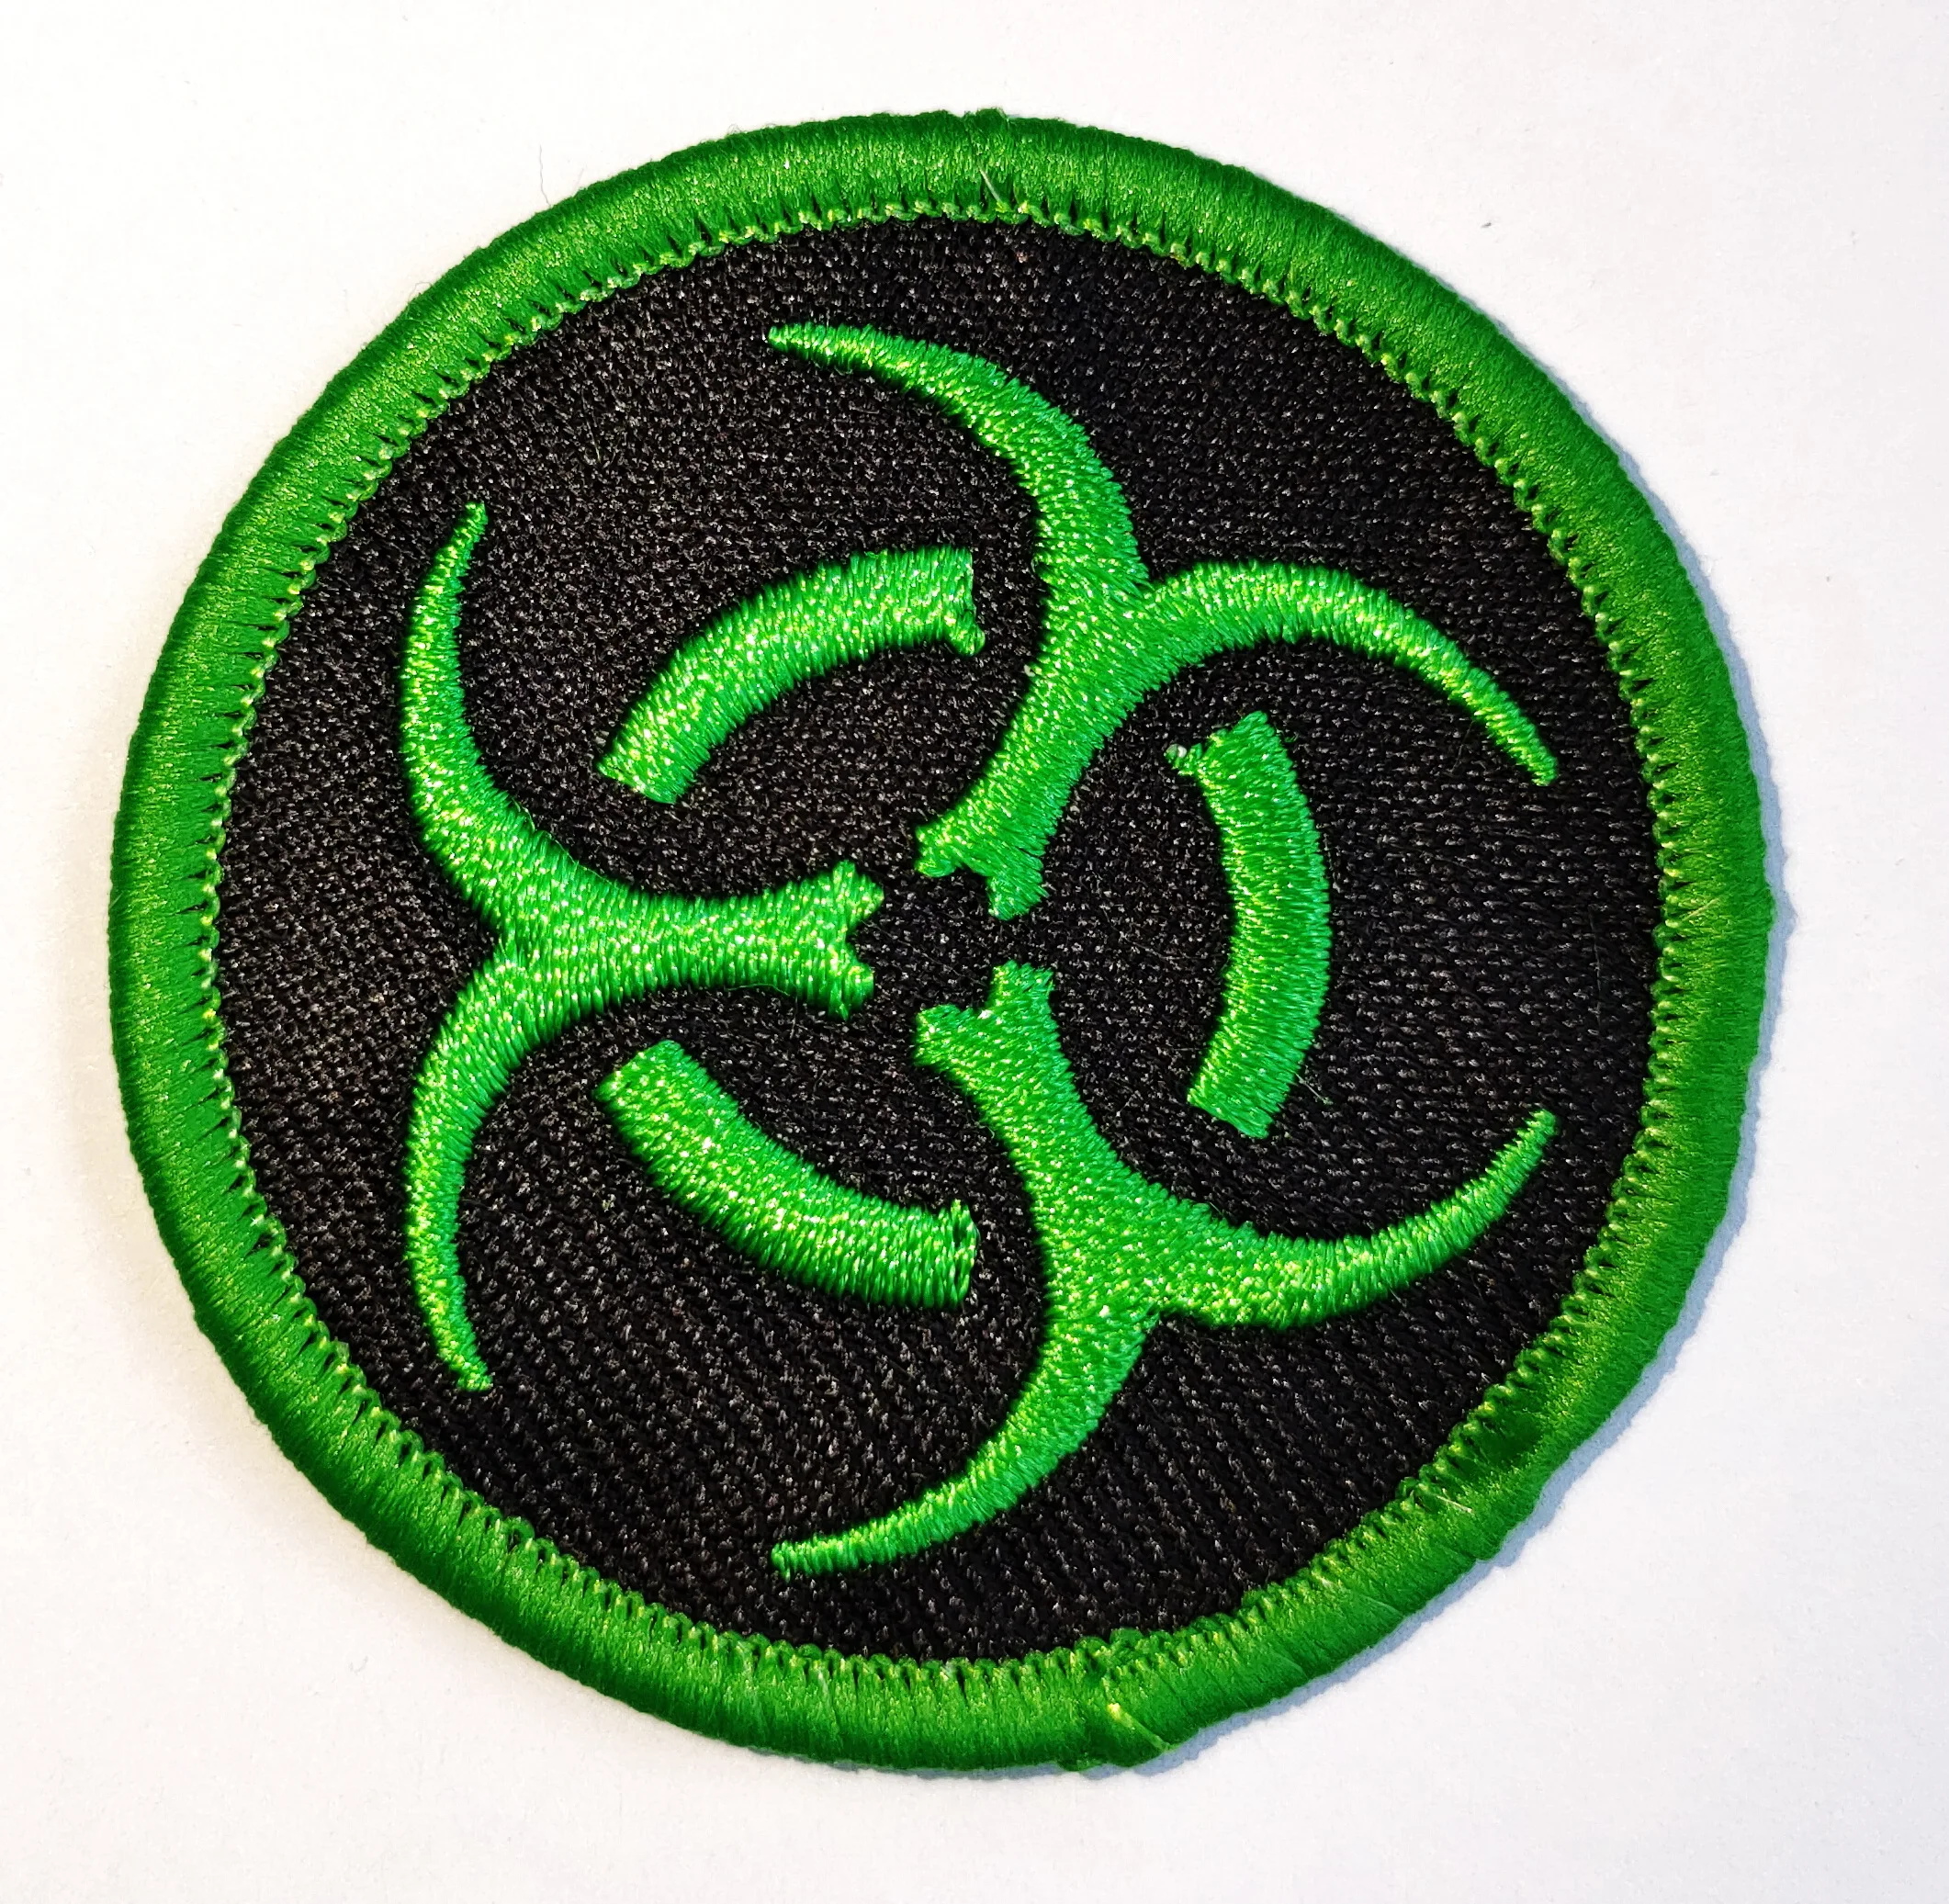 ZOMBIE STATES OF AMERICA PATCH embroidered iron-on BIOHAZARD SYMBOL UNITED BLACK 